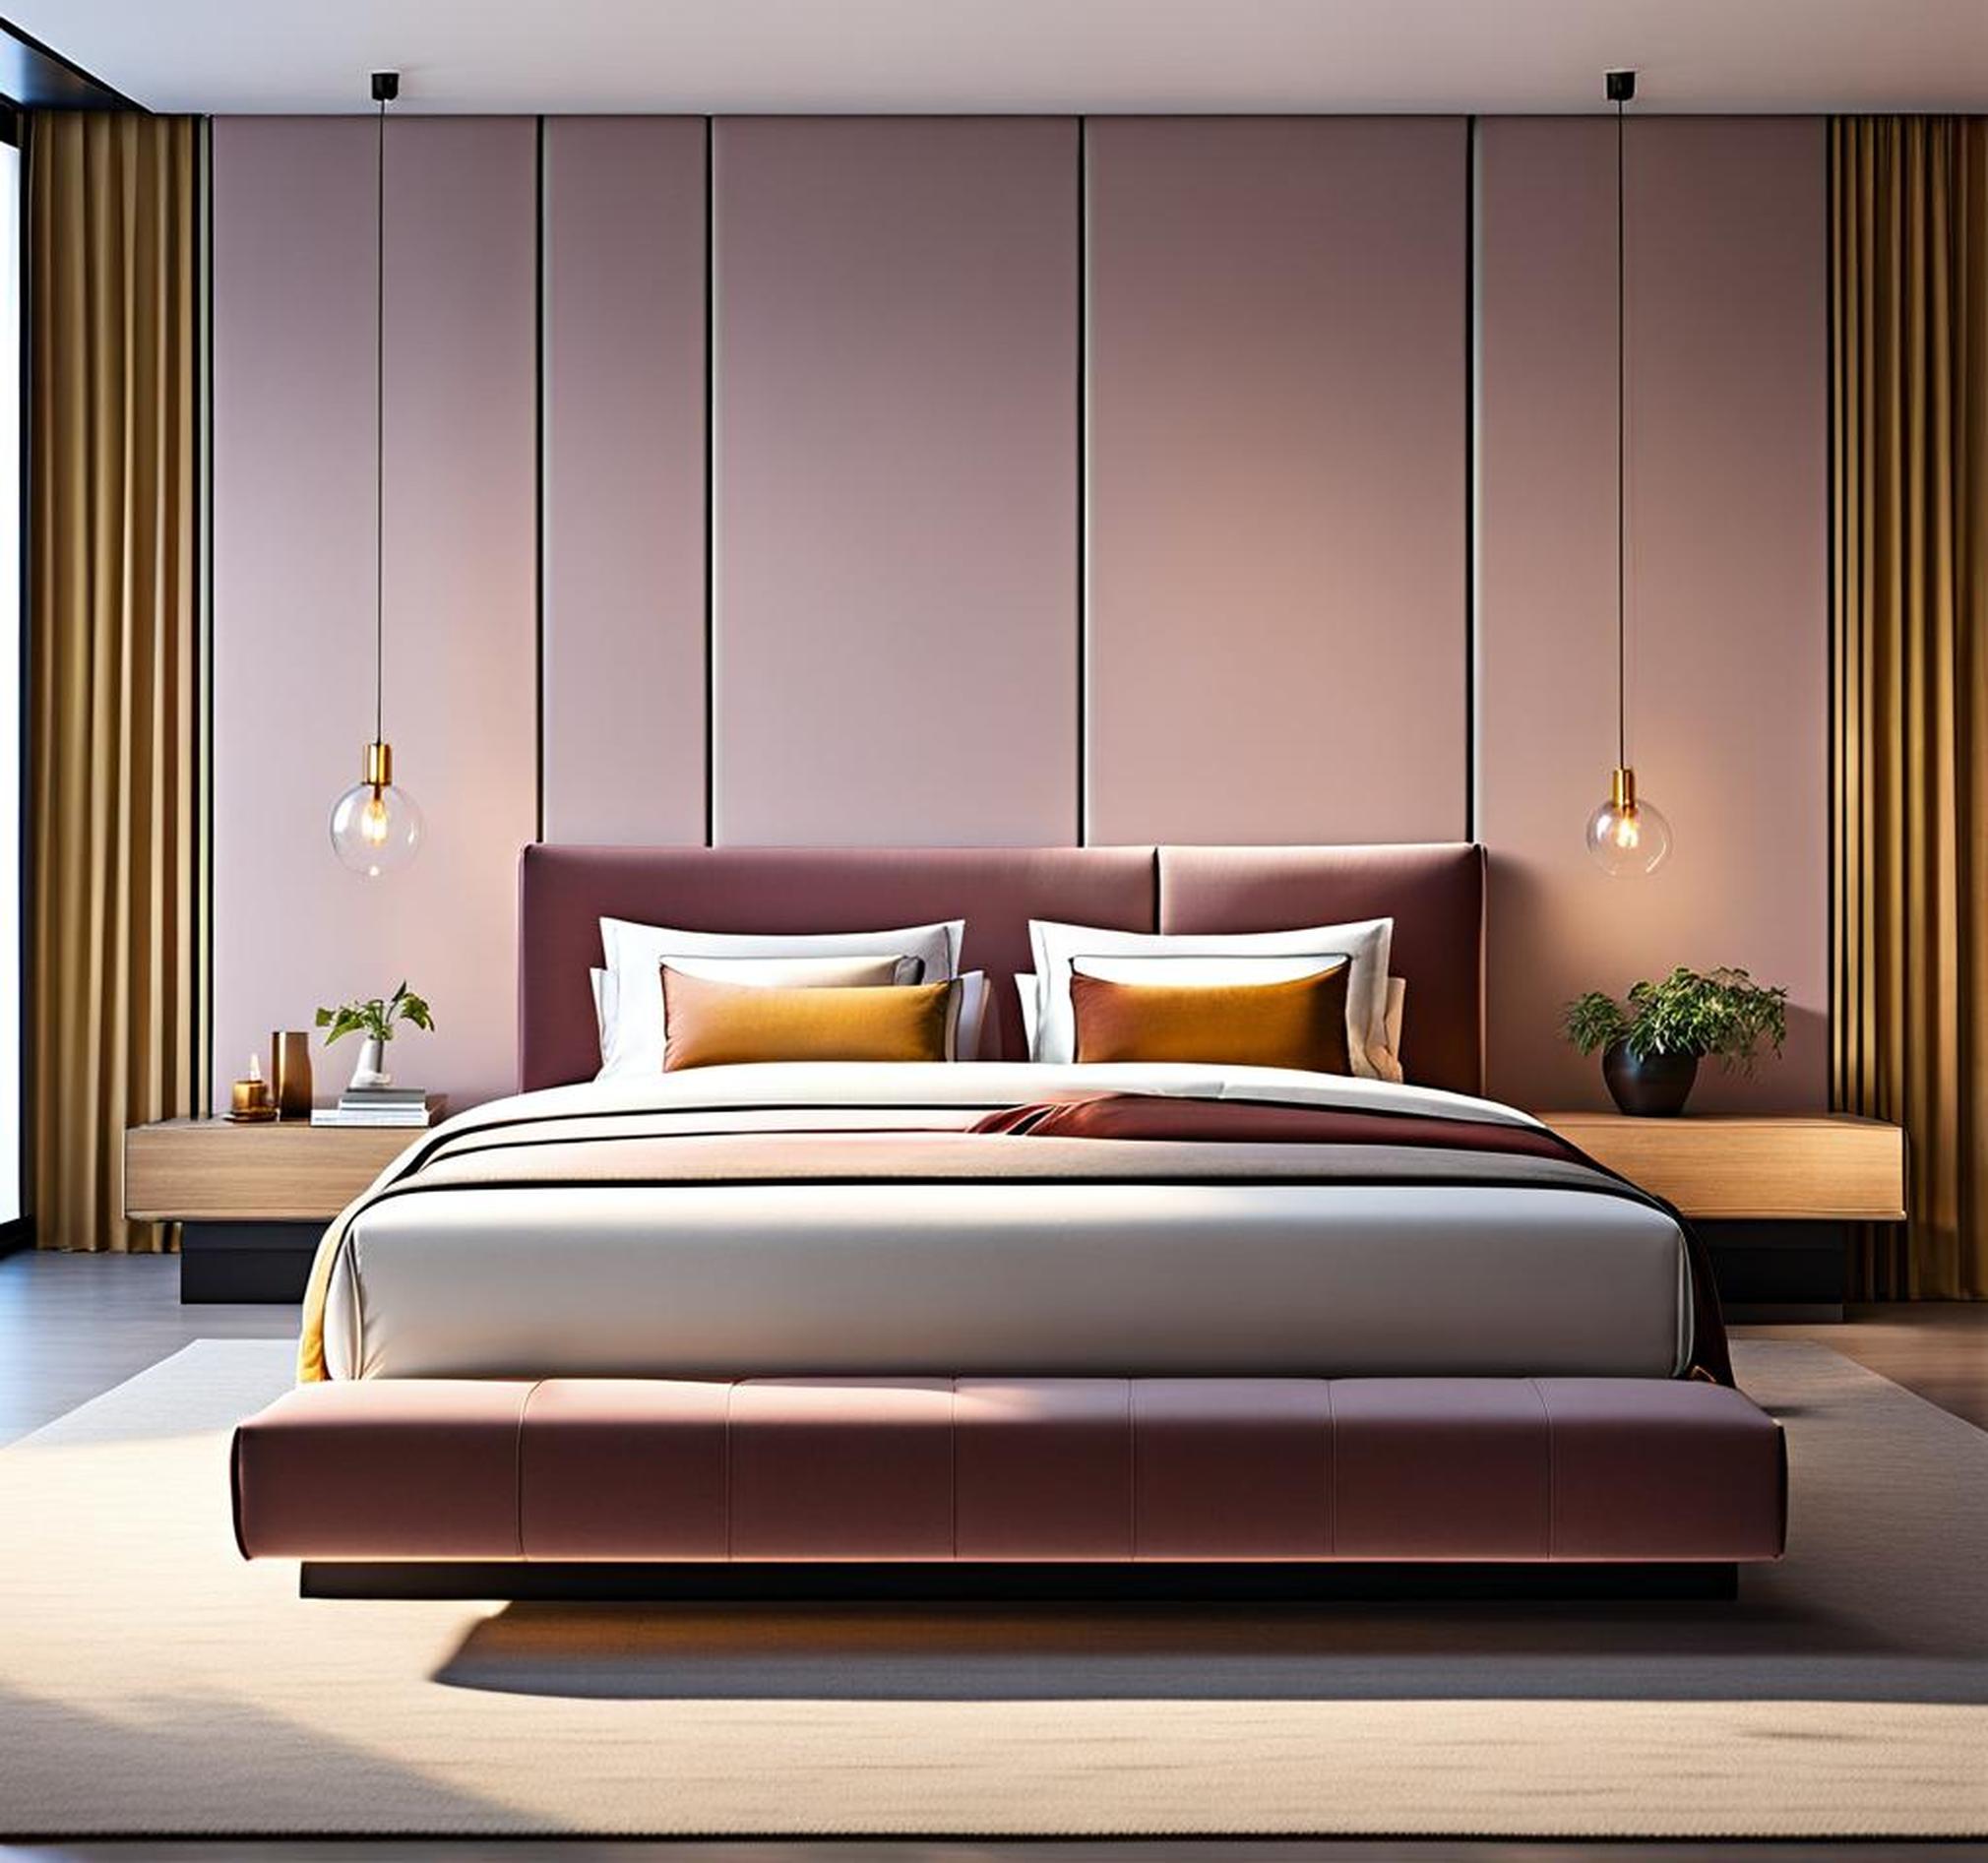 The Complete Guide to Design a No Headboard Bed for the Modern Home